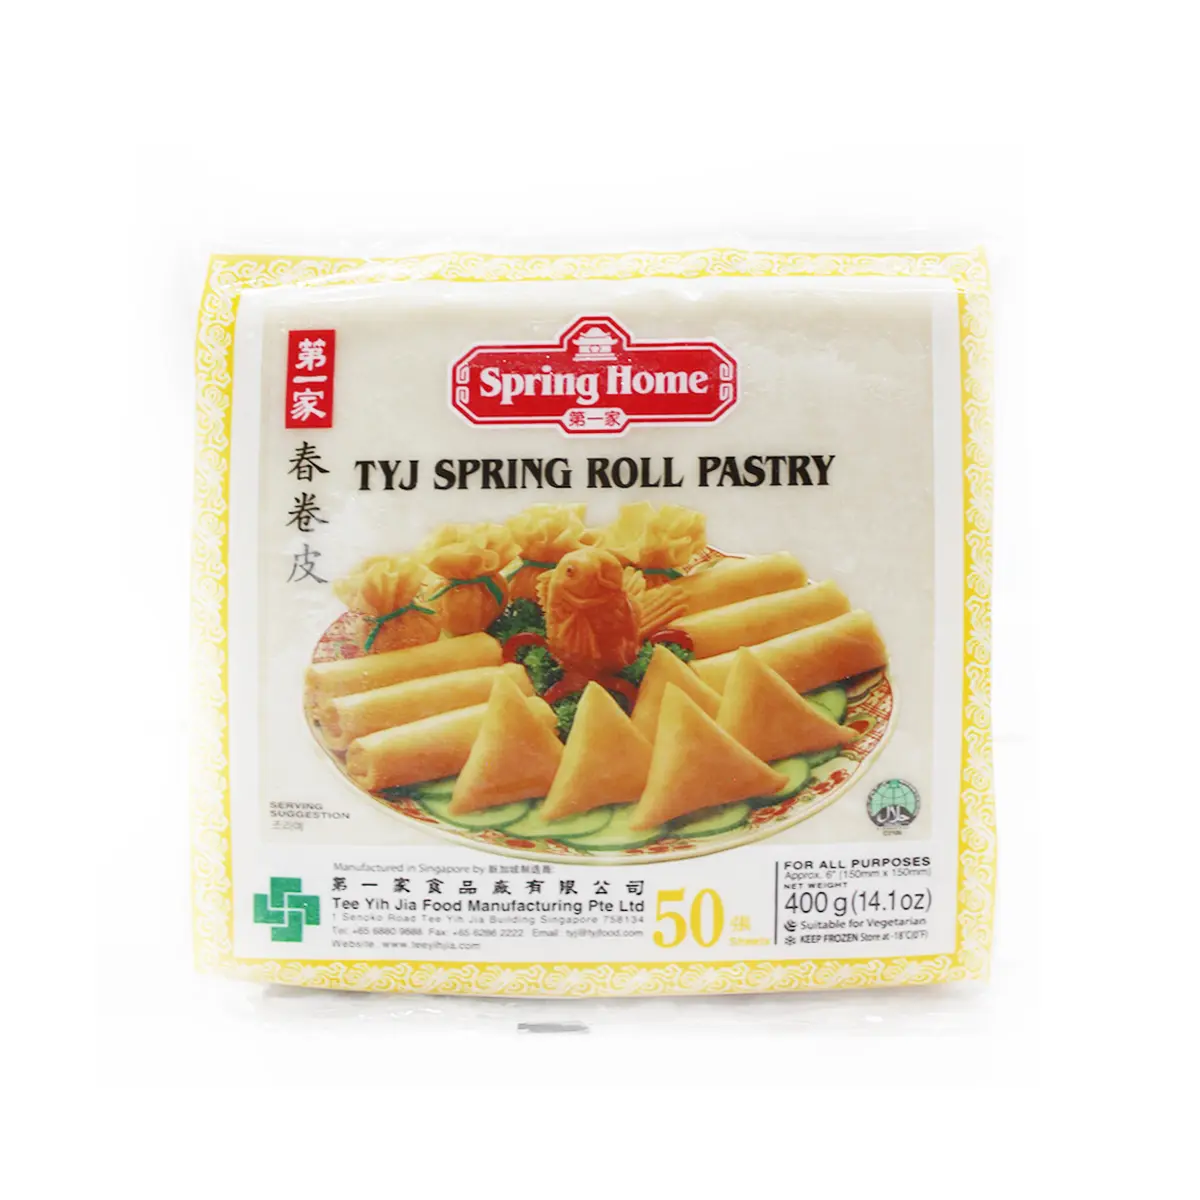 Spring Home Tyj Spring Roll Pastry 6" 400g - Refrigerated & Frozen / Frozen  Asian Food For Deliver